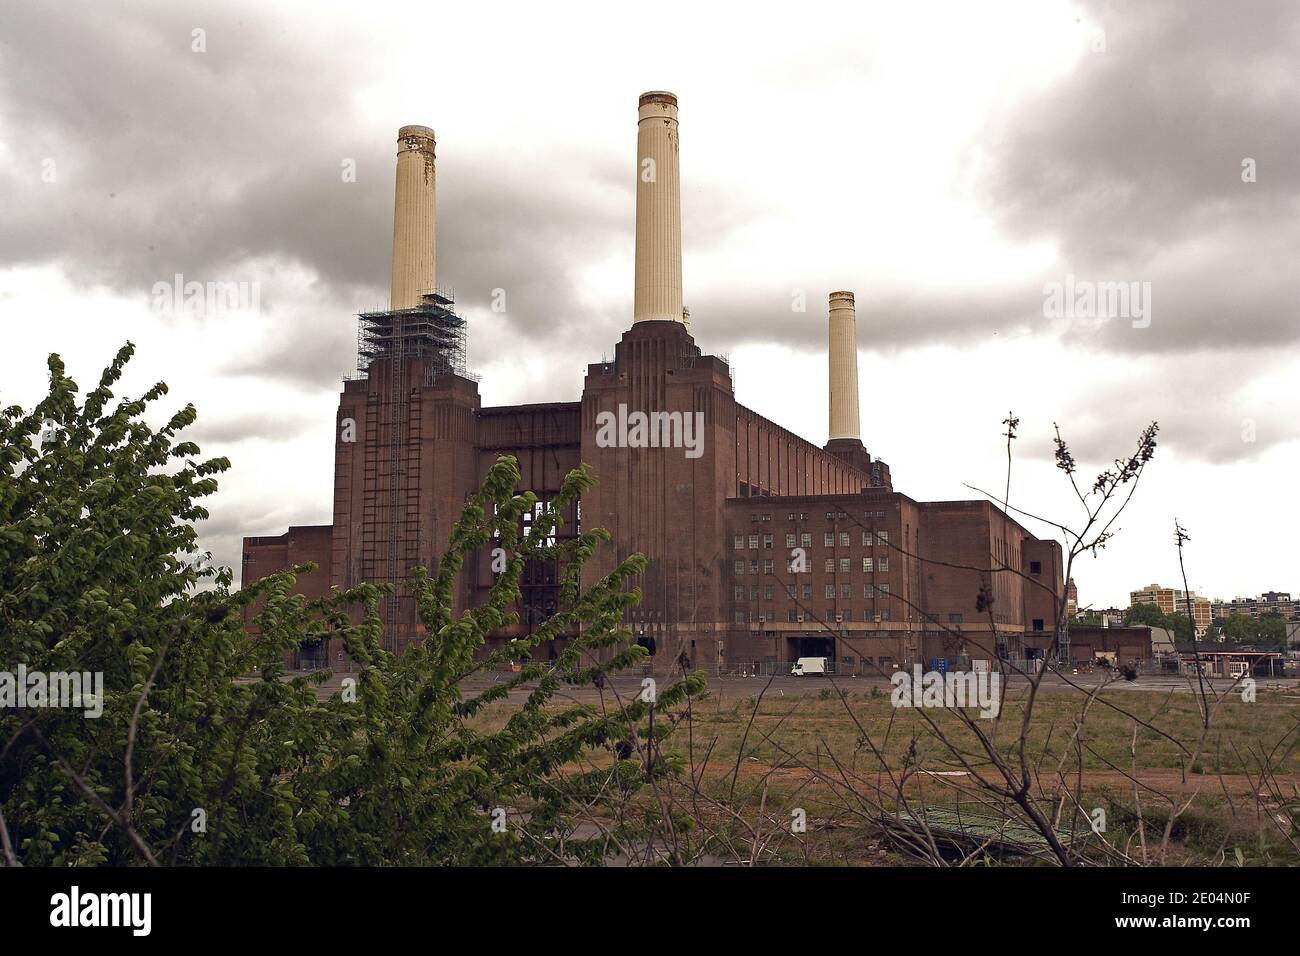 Battersea Power station designed by Giles Gilbert Scott-opened in 1933.It was a coal fired power station, Stock Photo